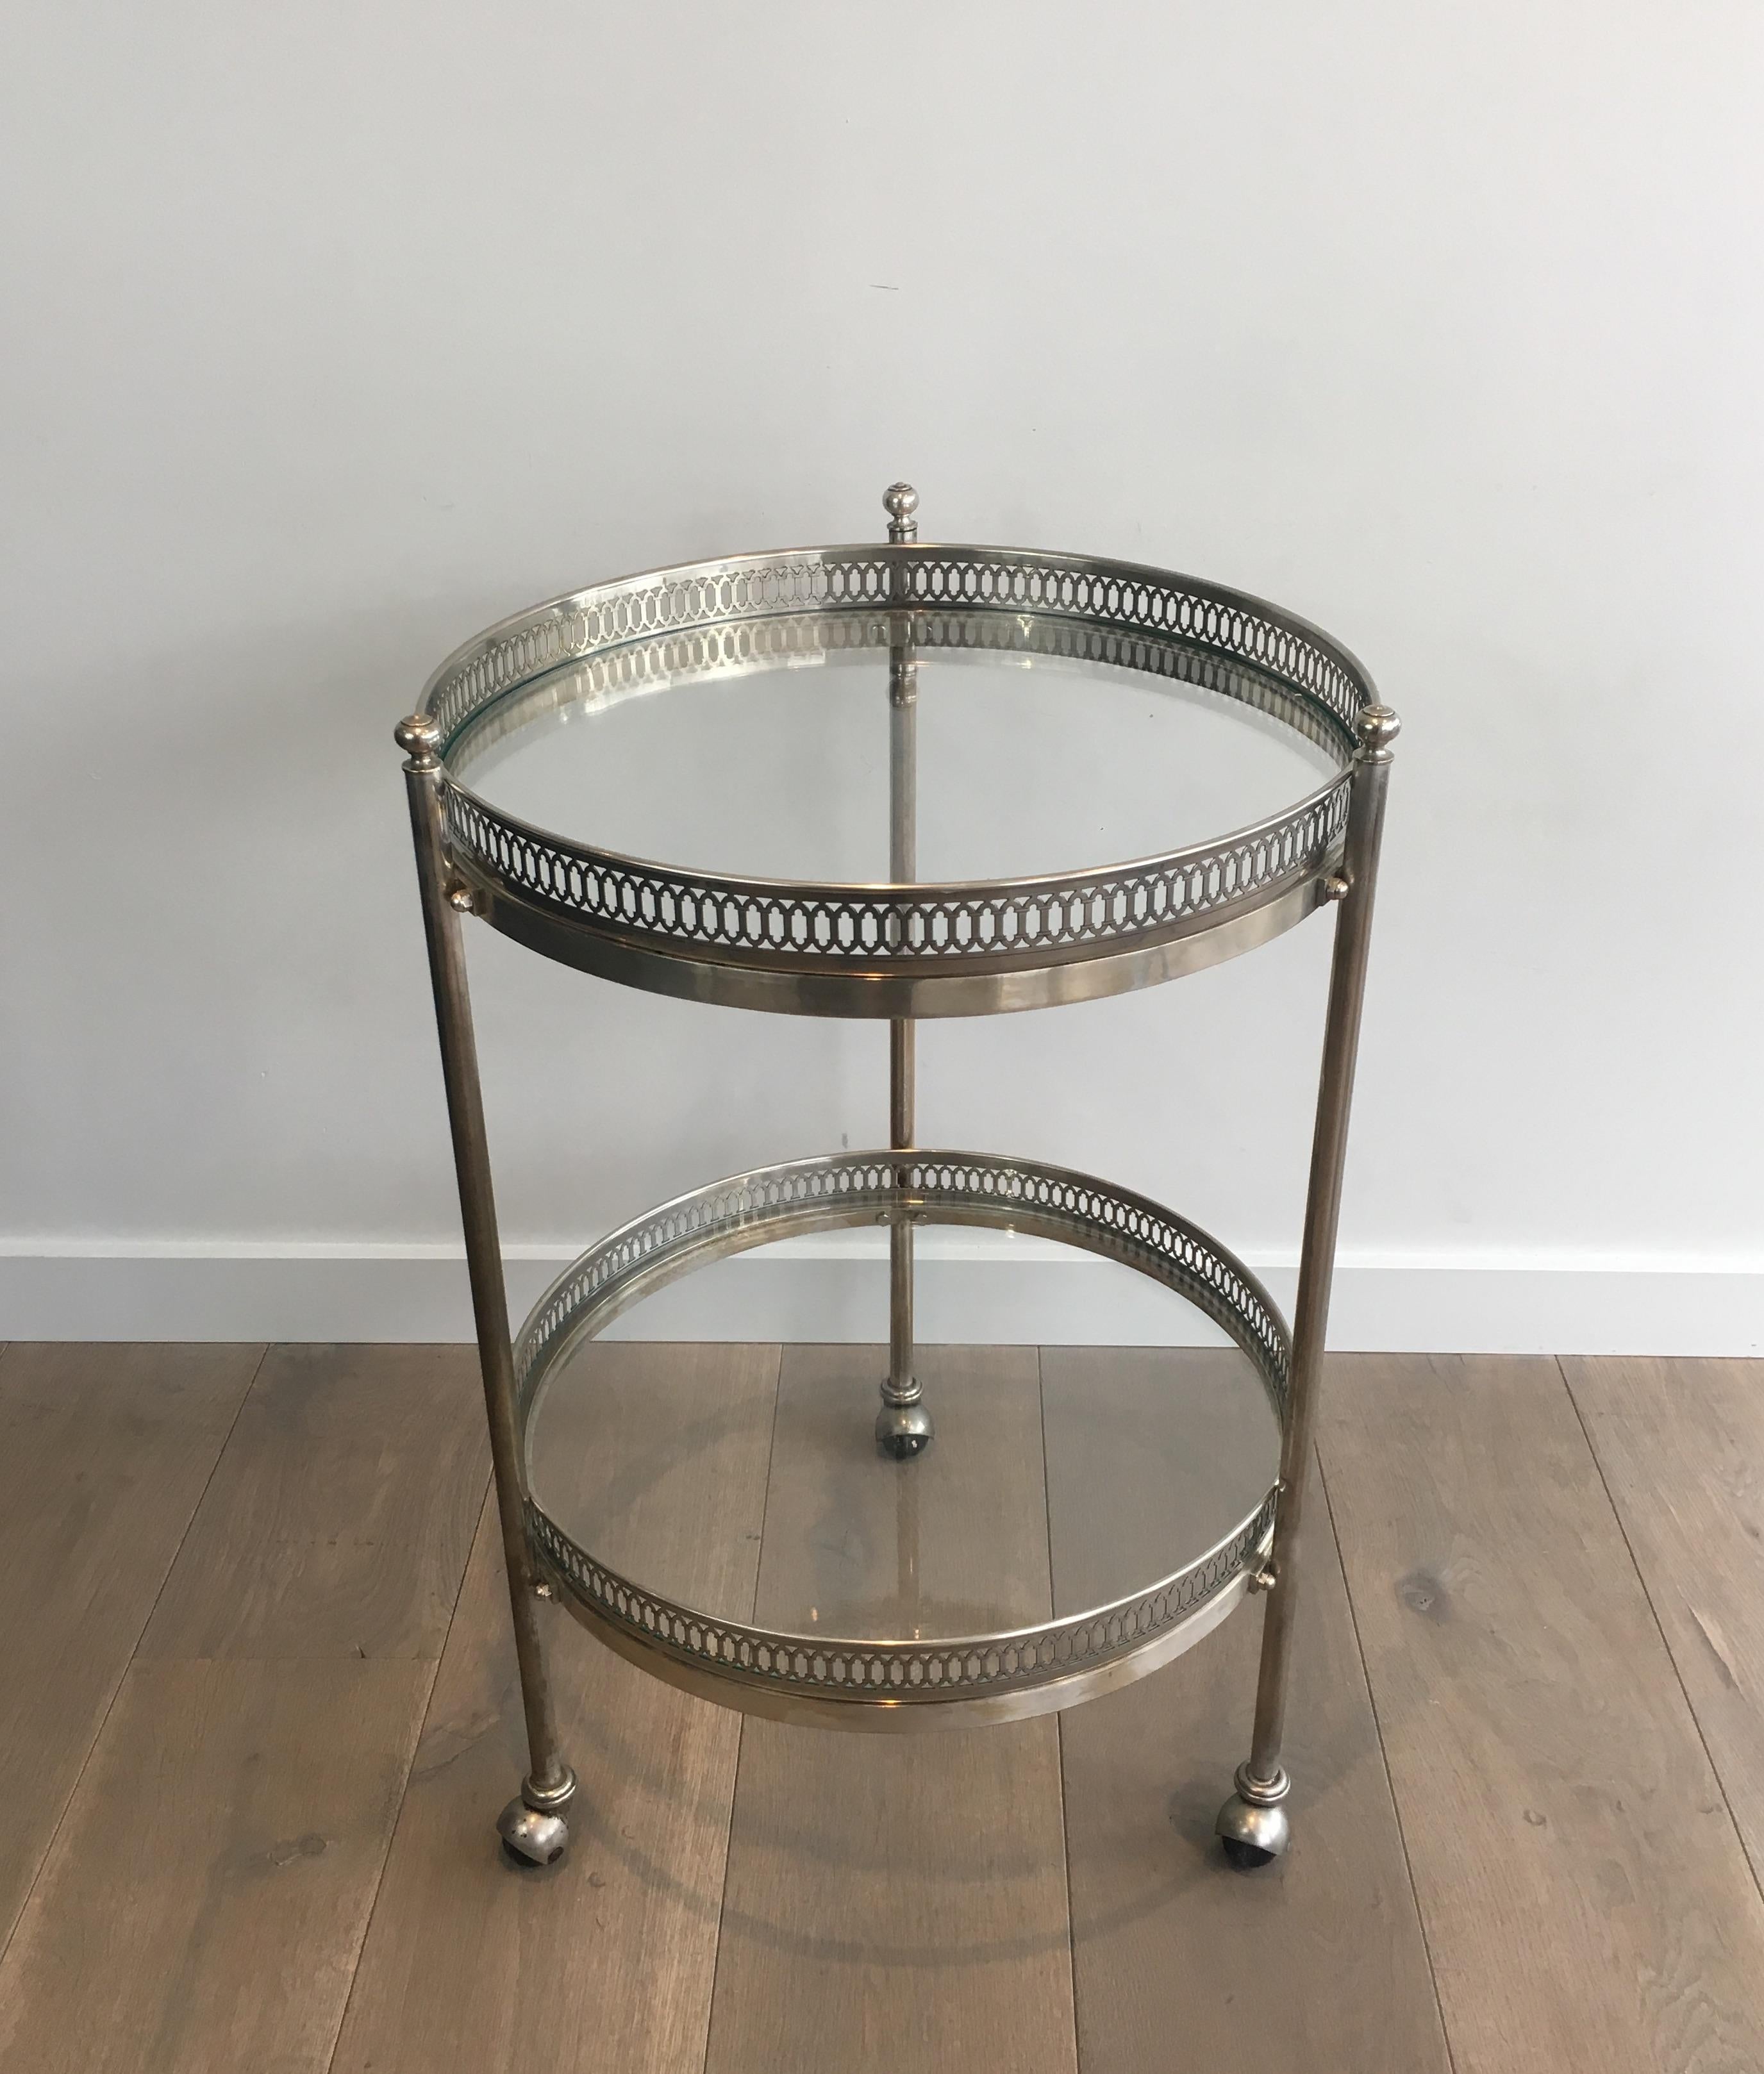 This unusual neoclassical large round trolley is made of silver plated brass. This is a French work, in the style of Maison Jansen, circa 1940.